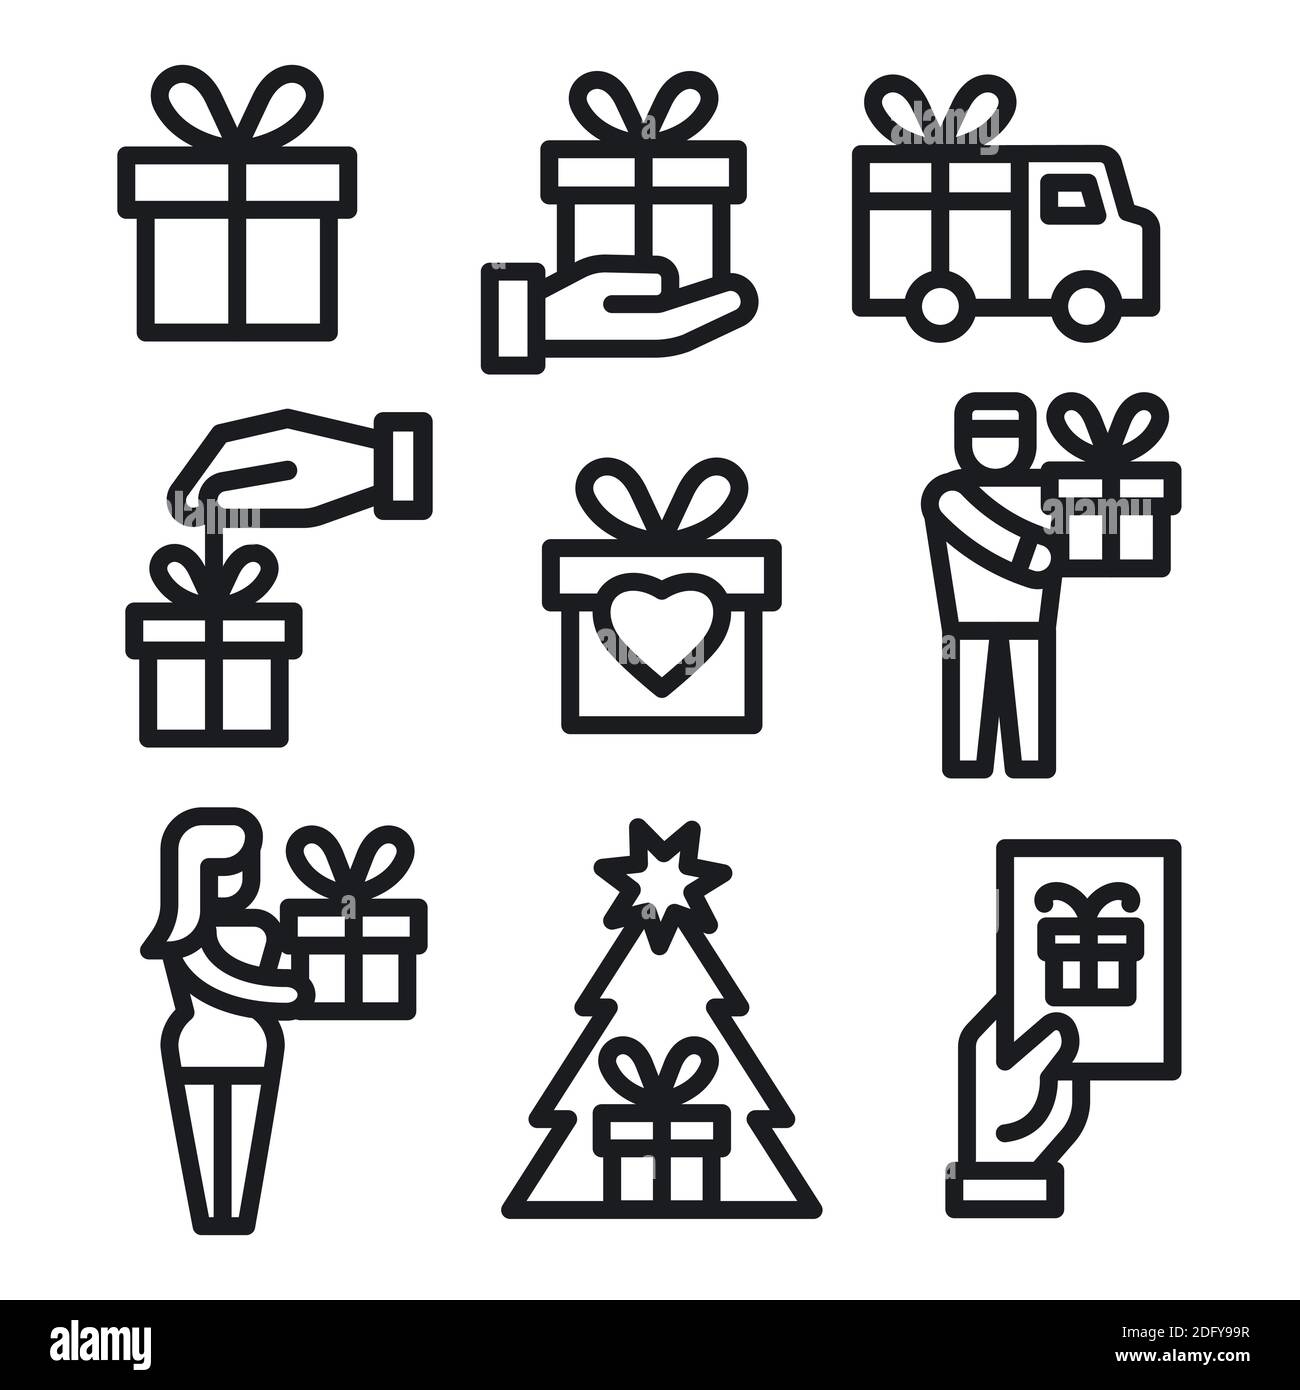 illustration of the gift and presents icons set Stock Vector